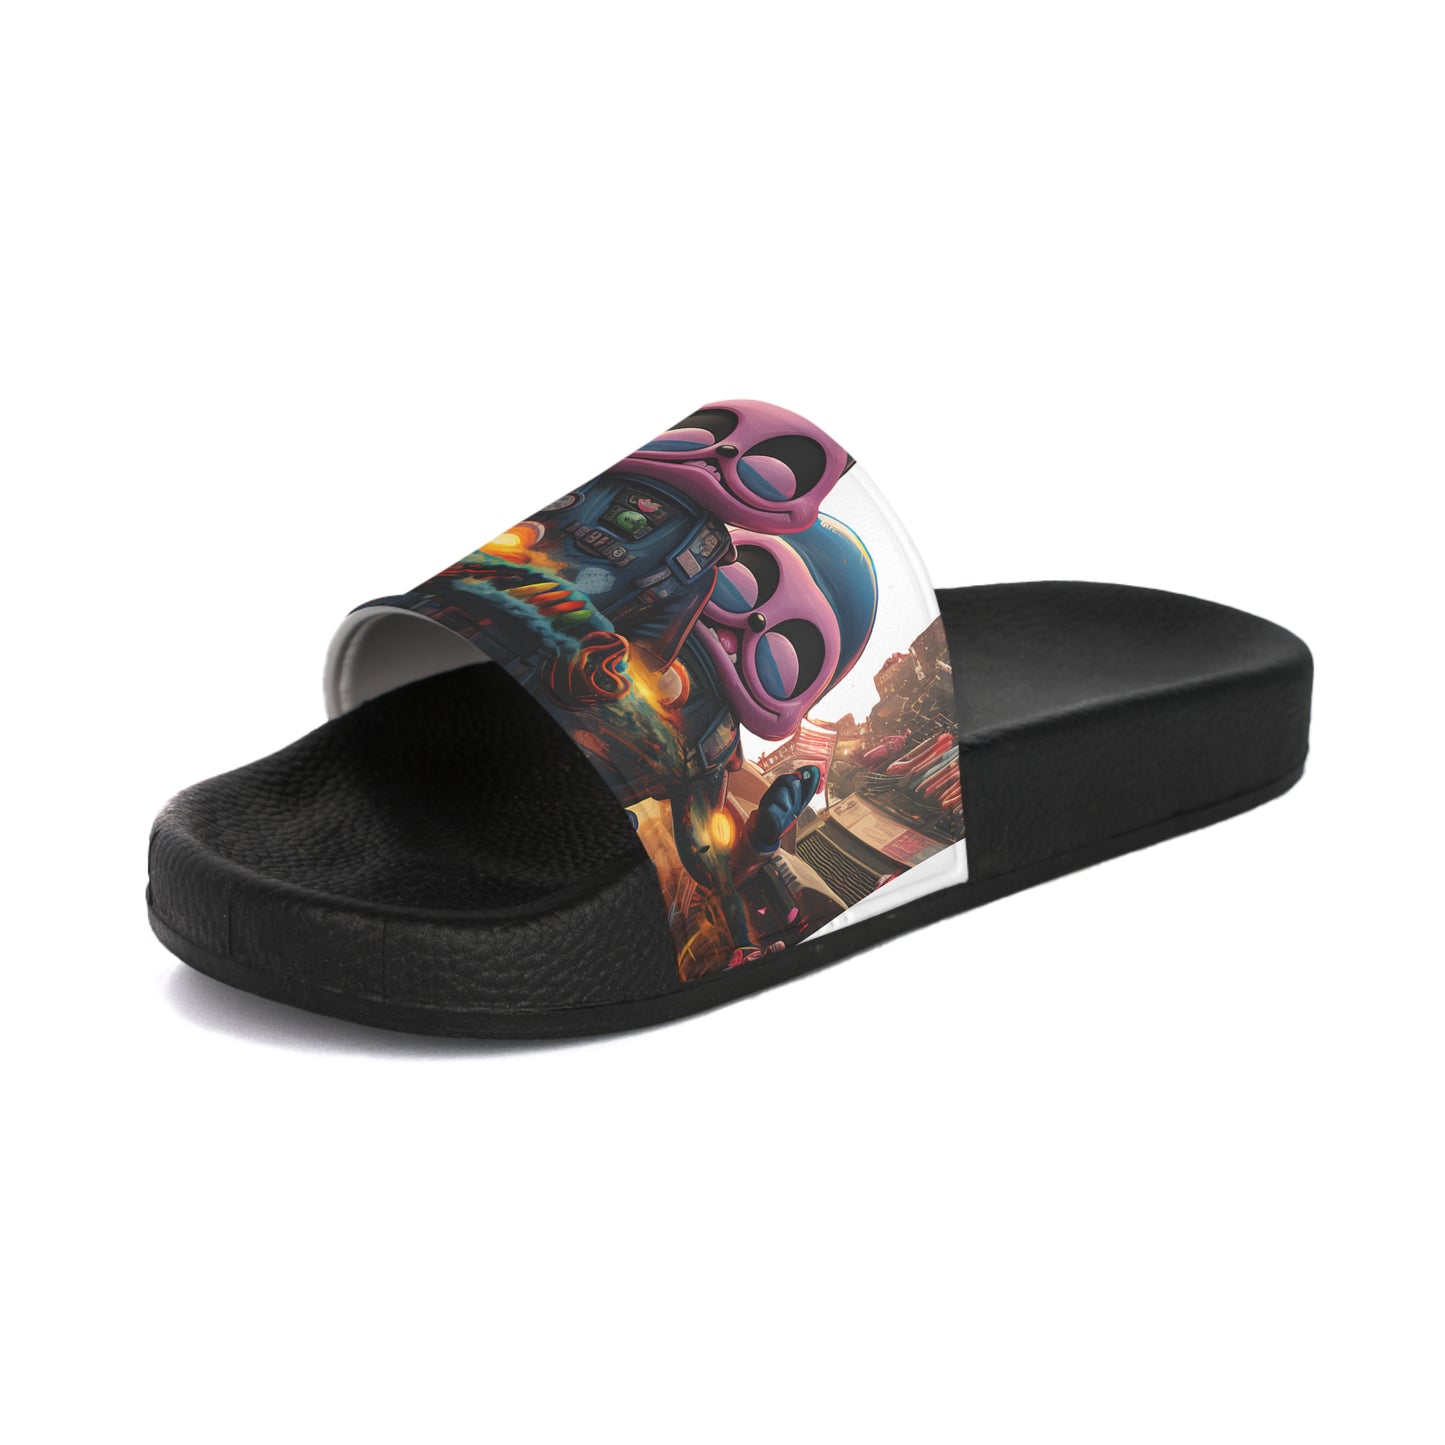 Women's Slide Sandals Pink Elephant Aliens in City Carrying the Beach Psychedelic 001